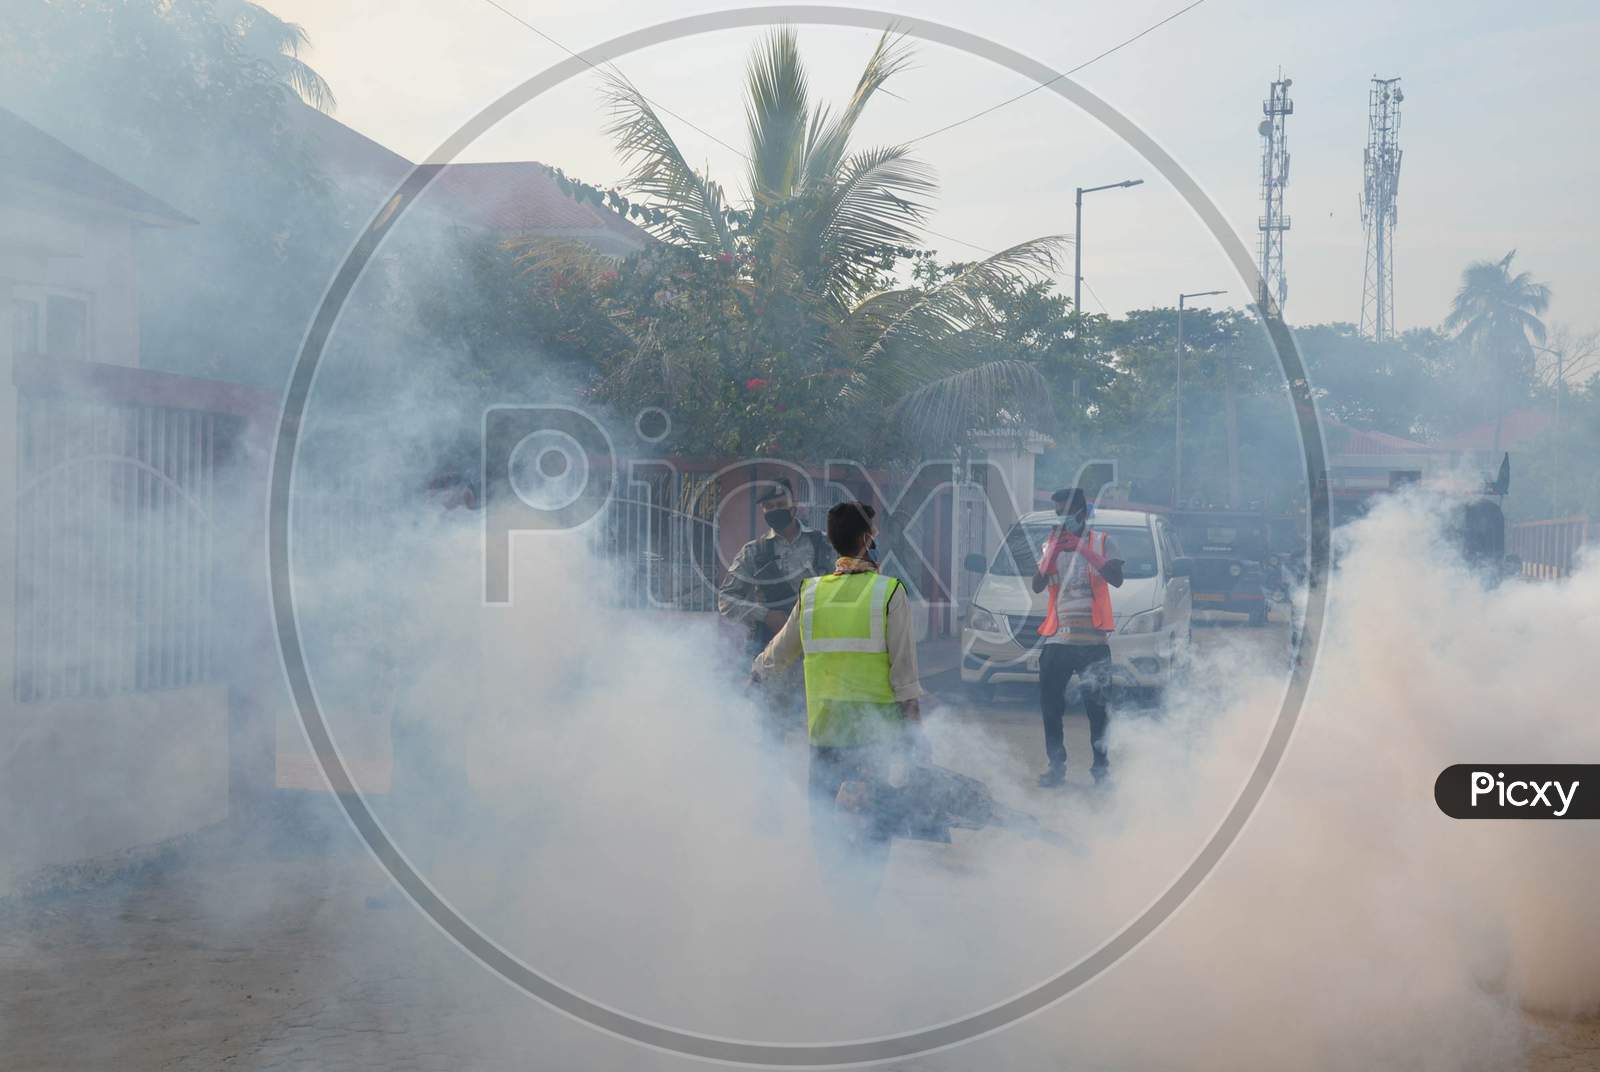 A Municipal Worker Fogging  Disinfectant In A Locality Amidst Coronavirus Or COVID-19 Pandemic In Guwahati On  May 1, 2020.